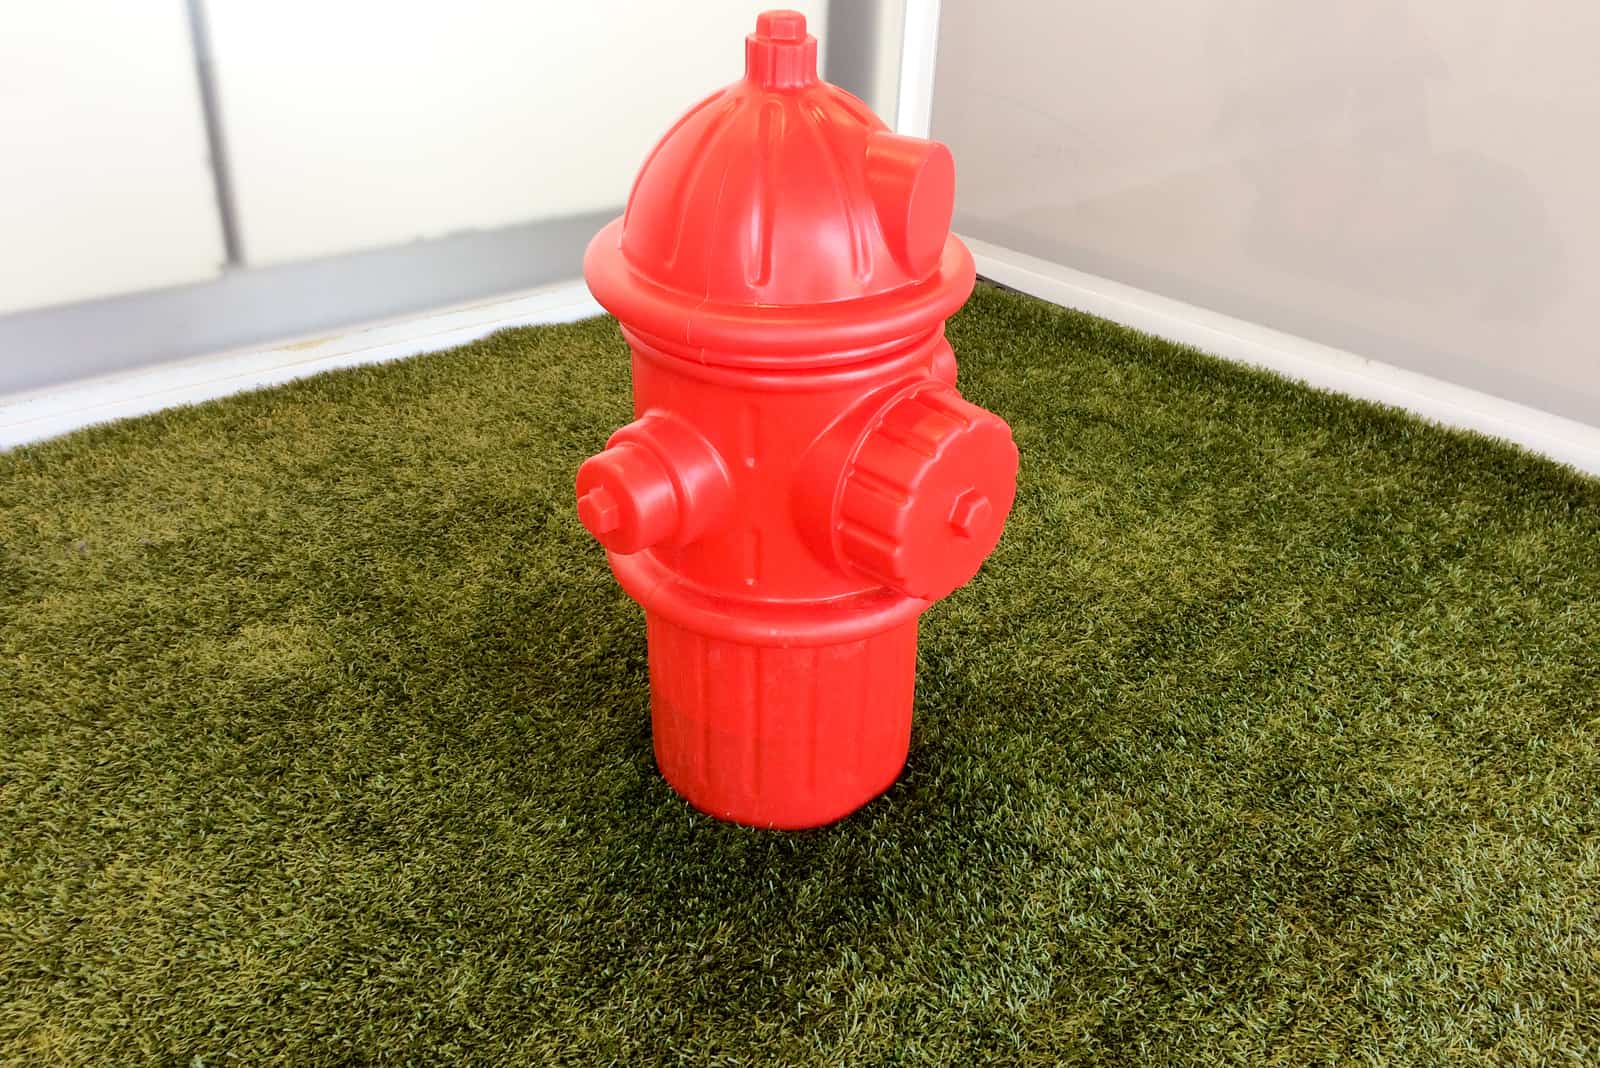 red fire hydrant on fake grass